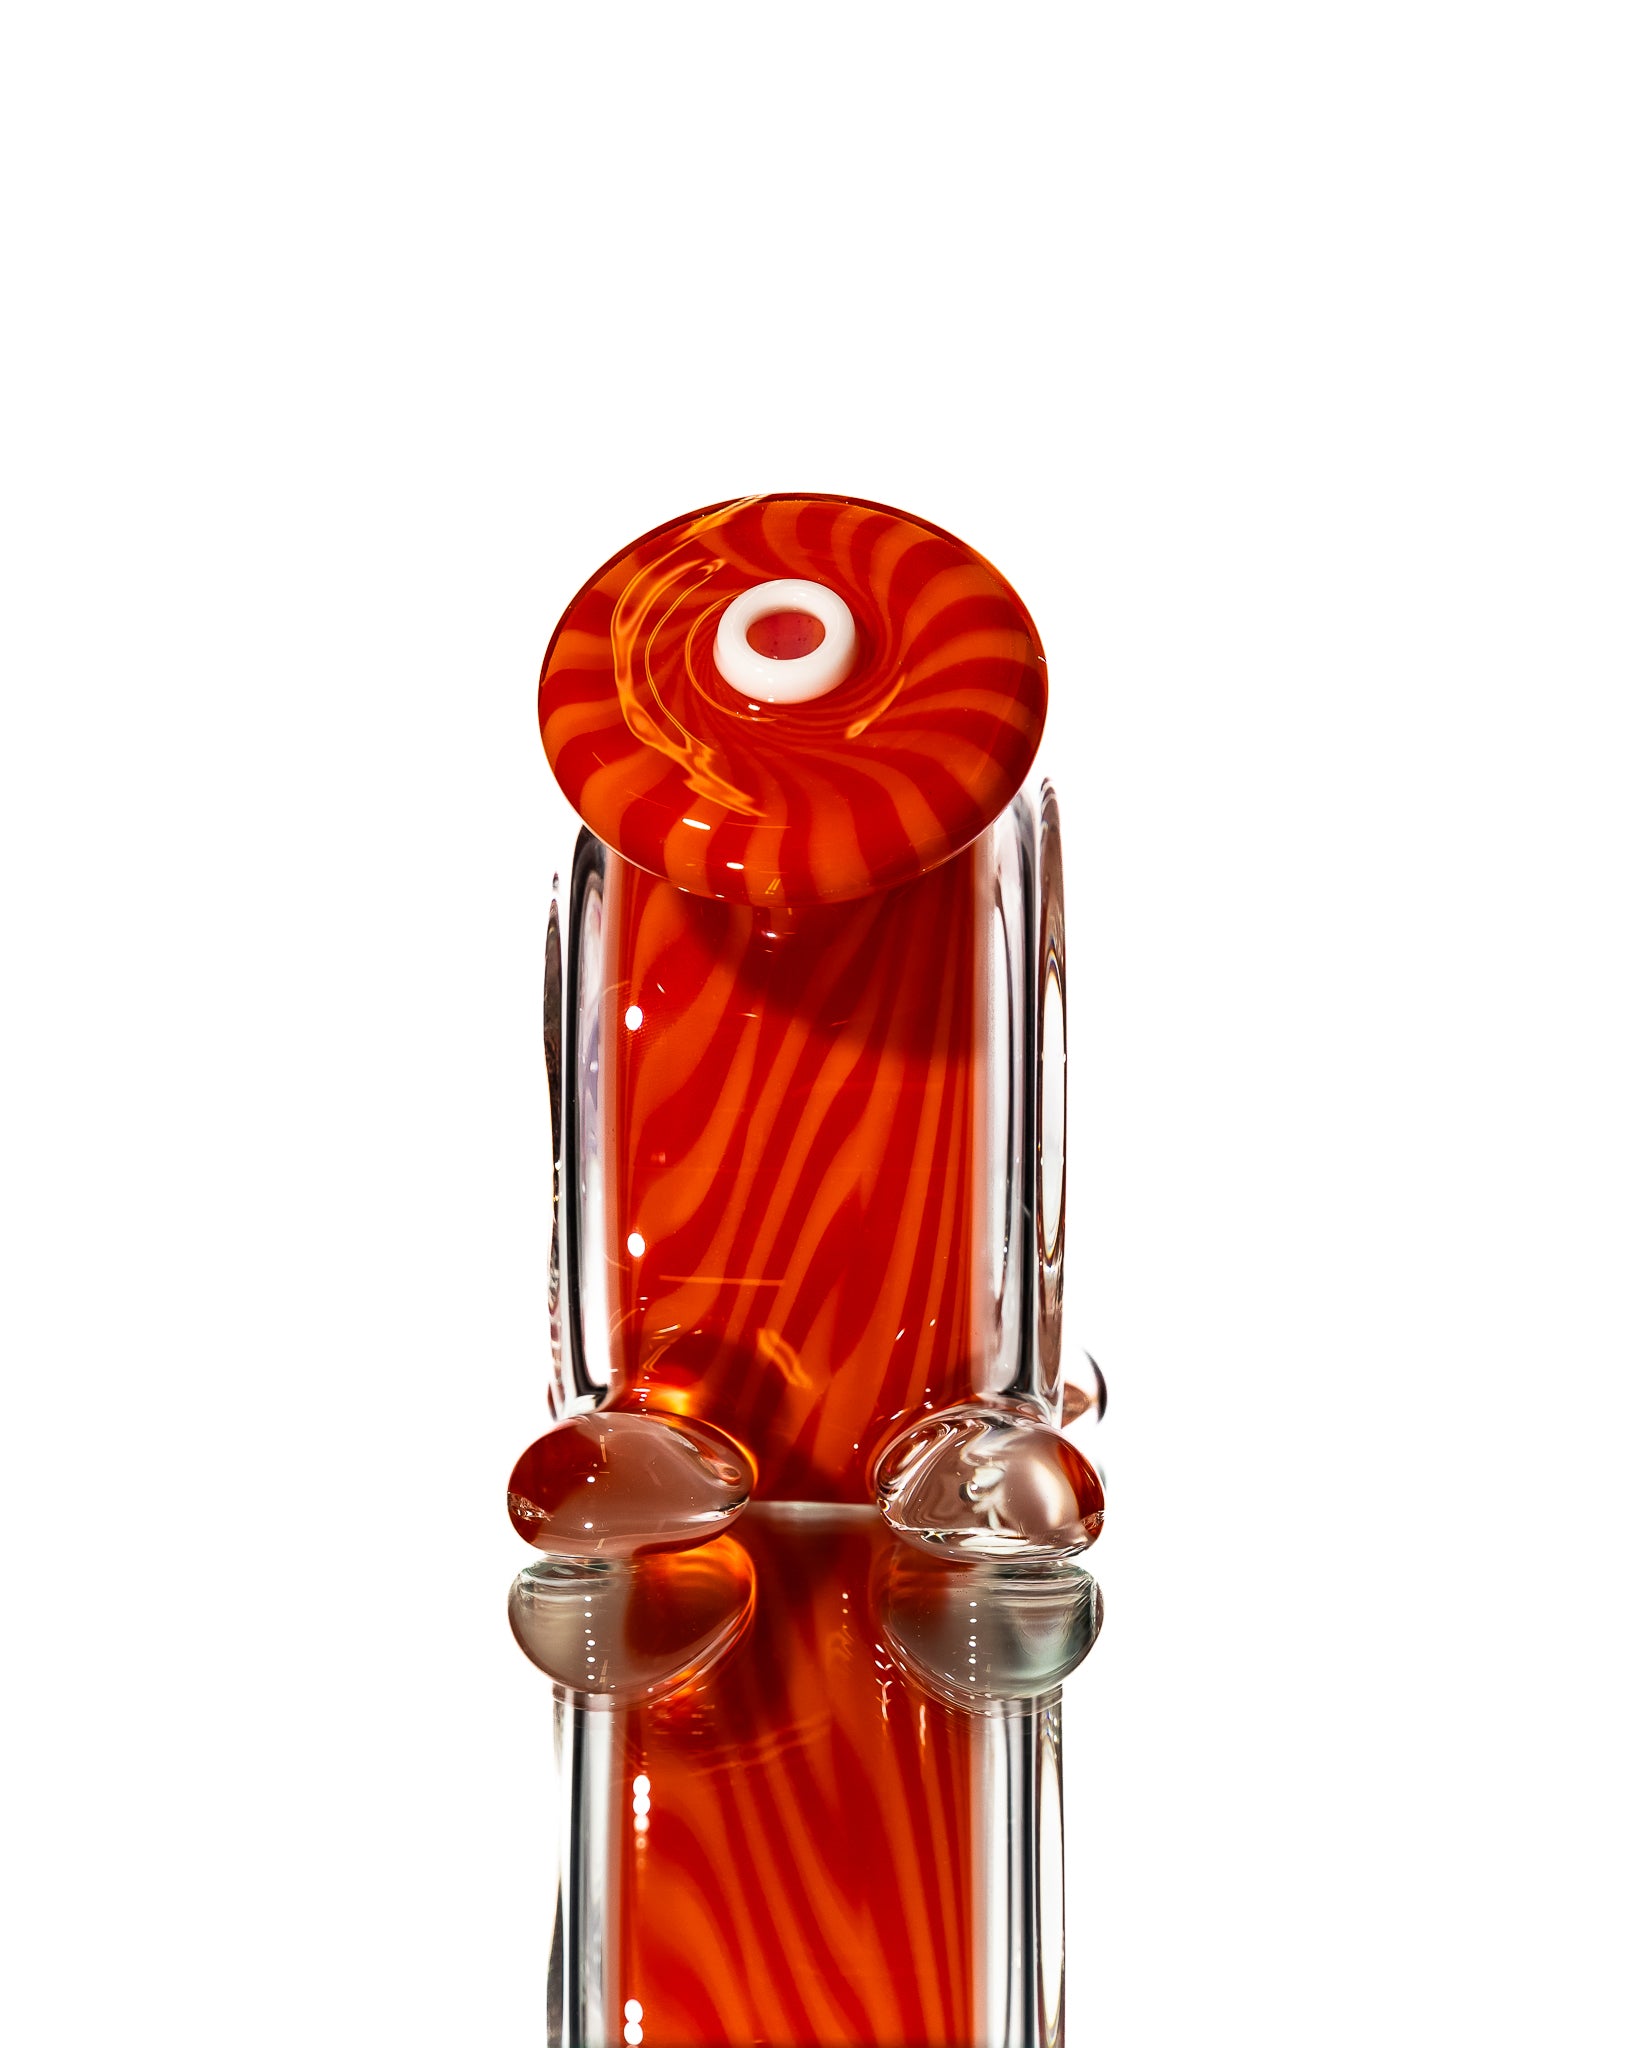 Coojo - Red Worked Mini Donut Rig